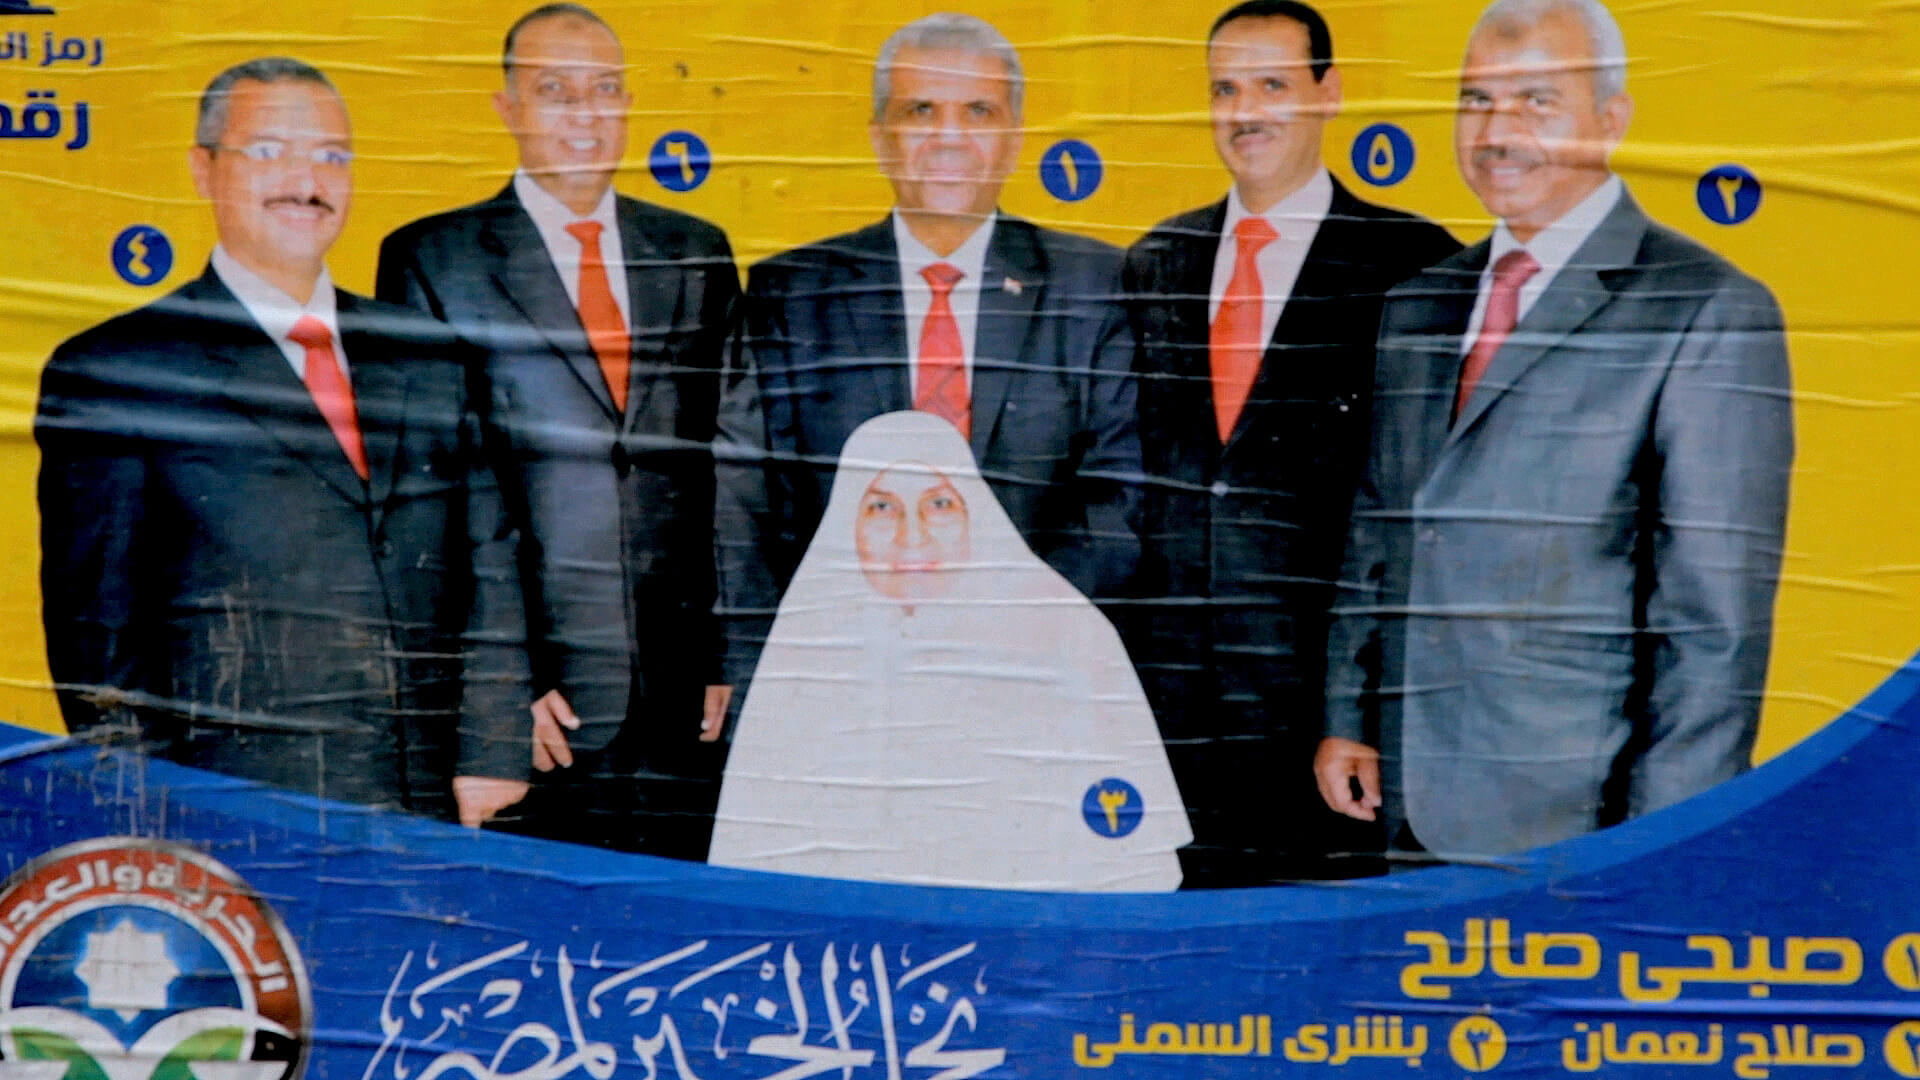 Still from The Vote. Photograph of a poster pasted on a wall. Three persons in suites are behind a person wearing a hijab.